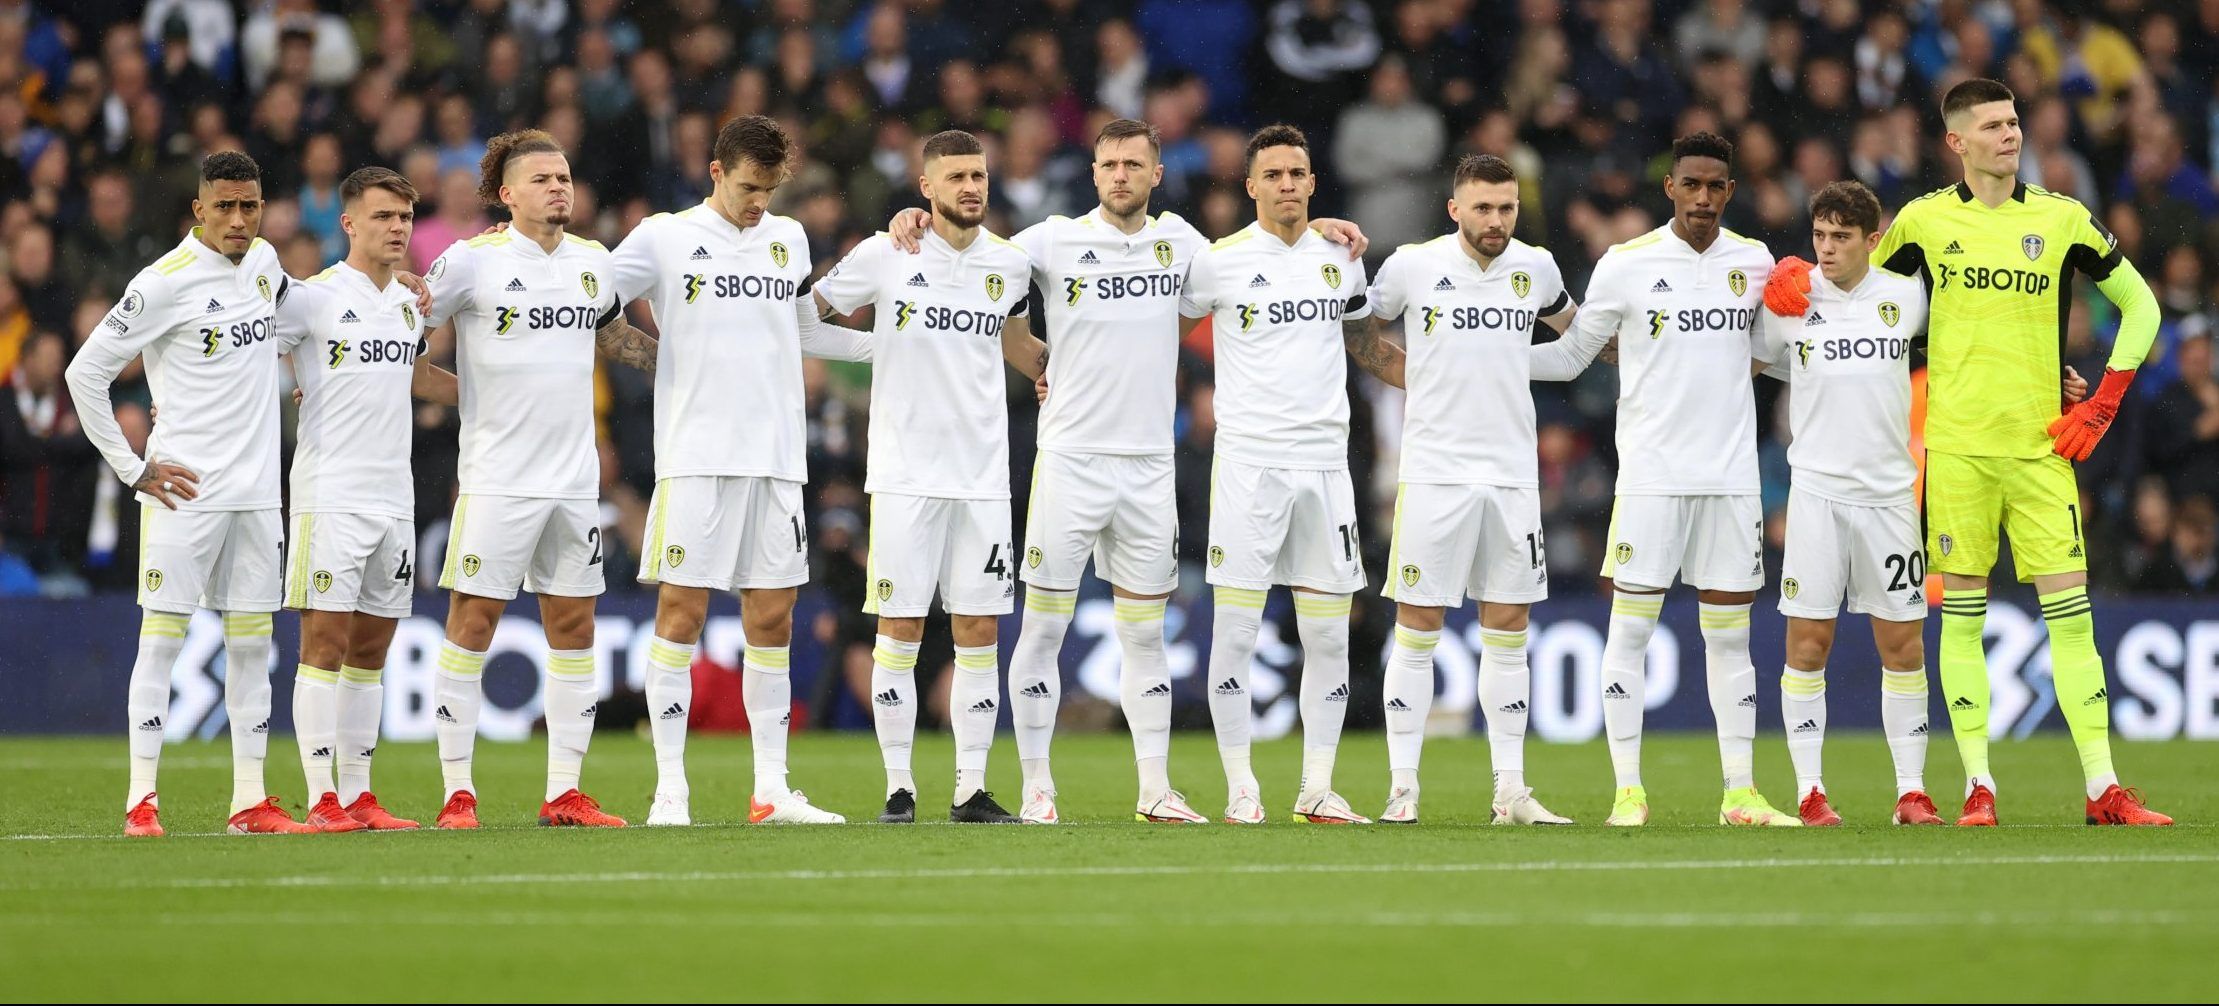 Leeds United players line up before Watford clash in the Premier League